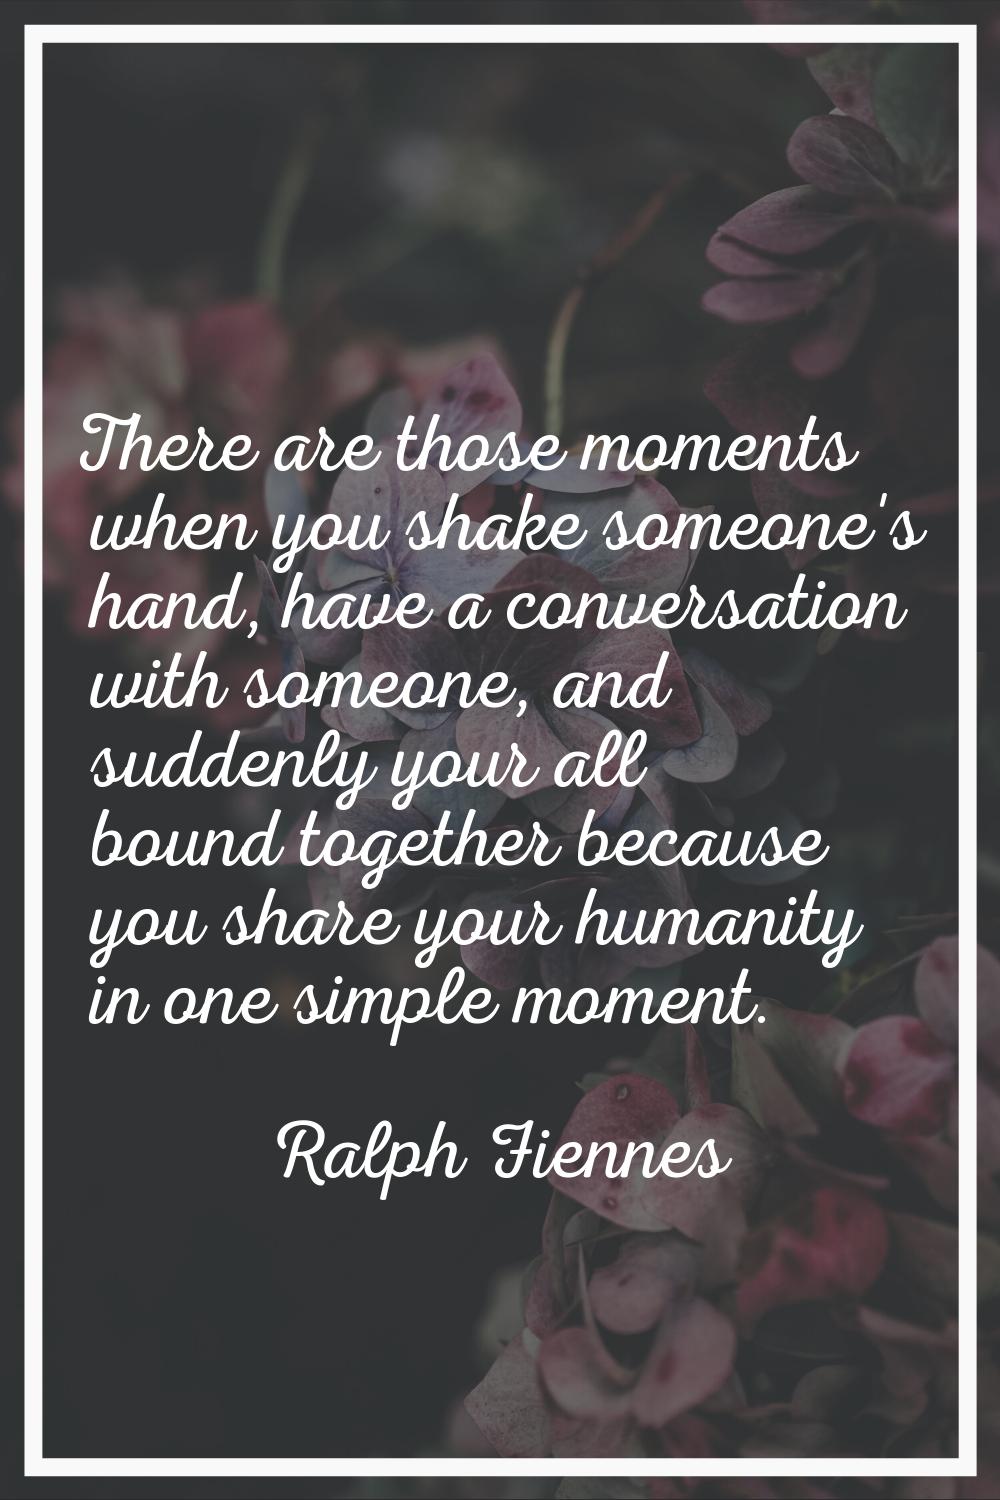 There are those moments when you shake someone's hand, have a conversation with someone, and sudden